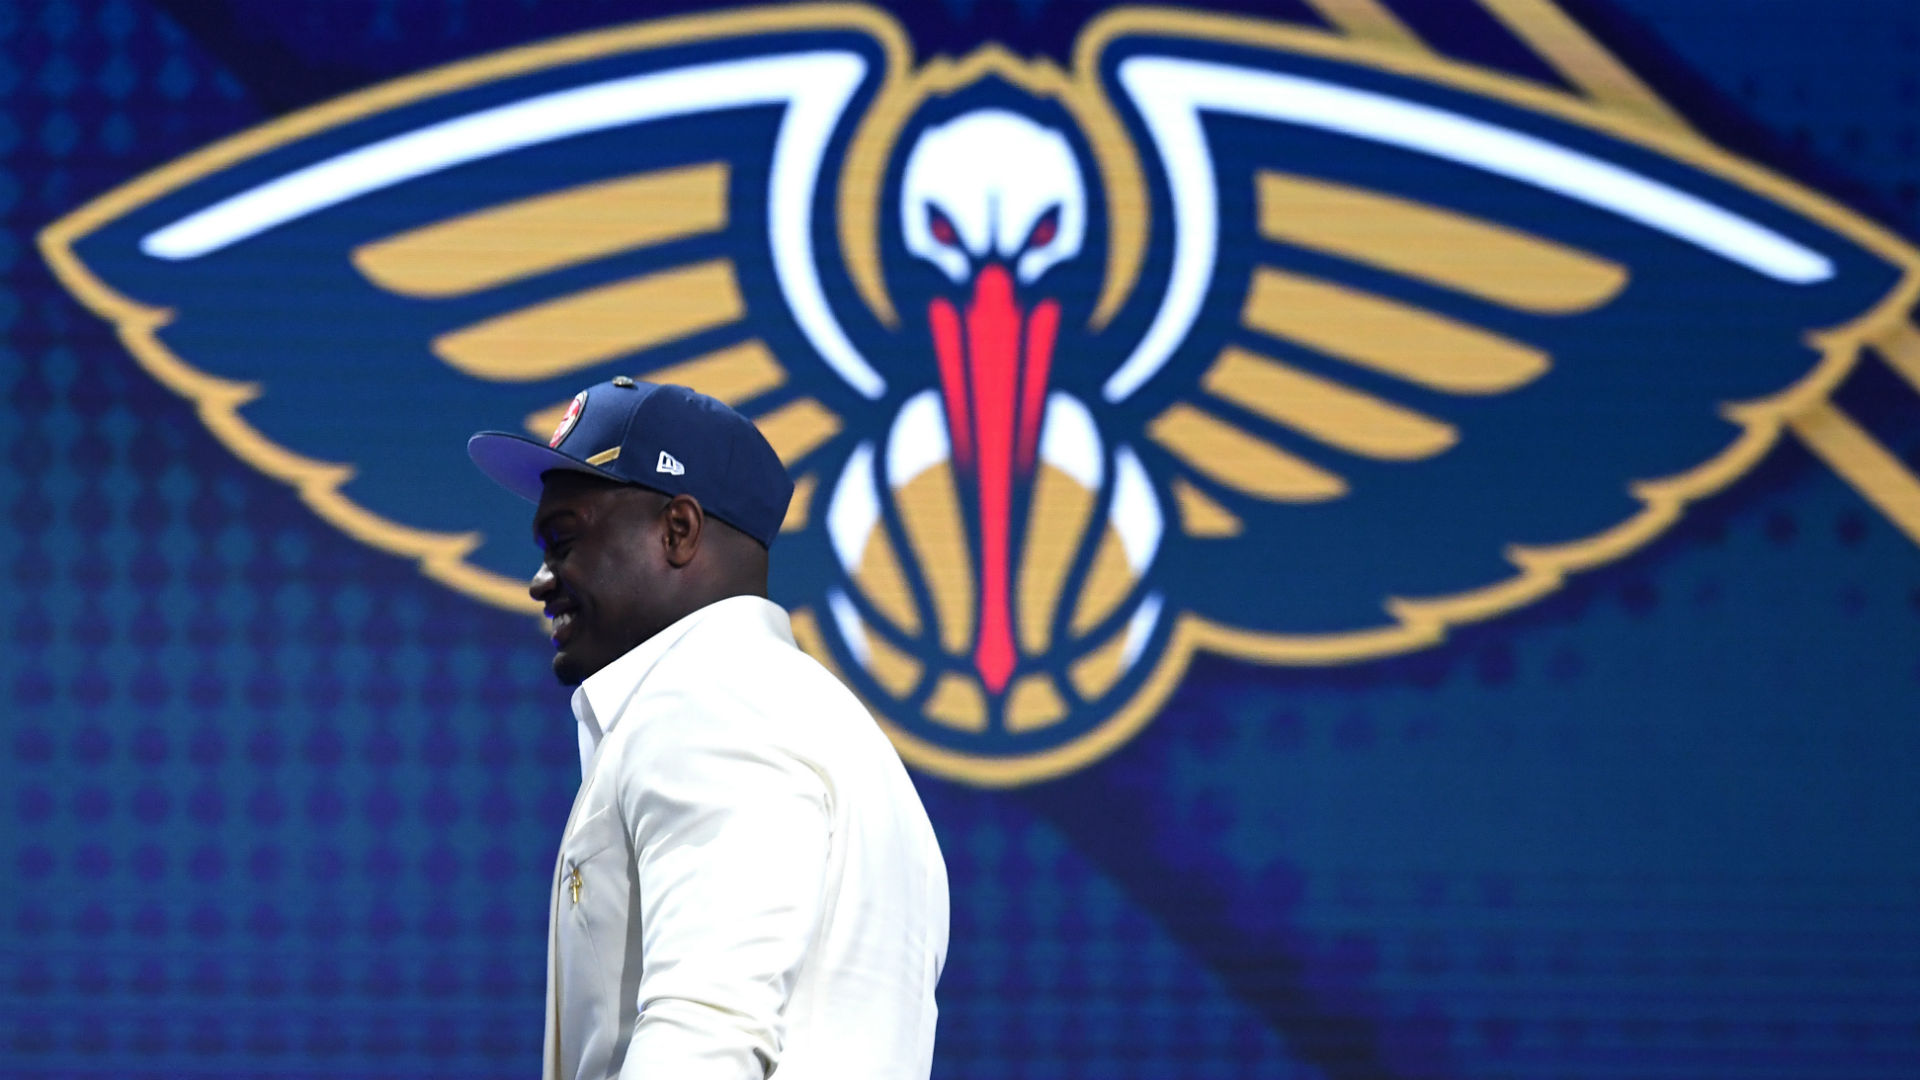 Flipboard: The Pelicans Selected Zion Williamson No. 1 Overall In The 2019 NBA Draft ...